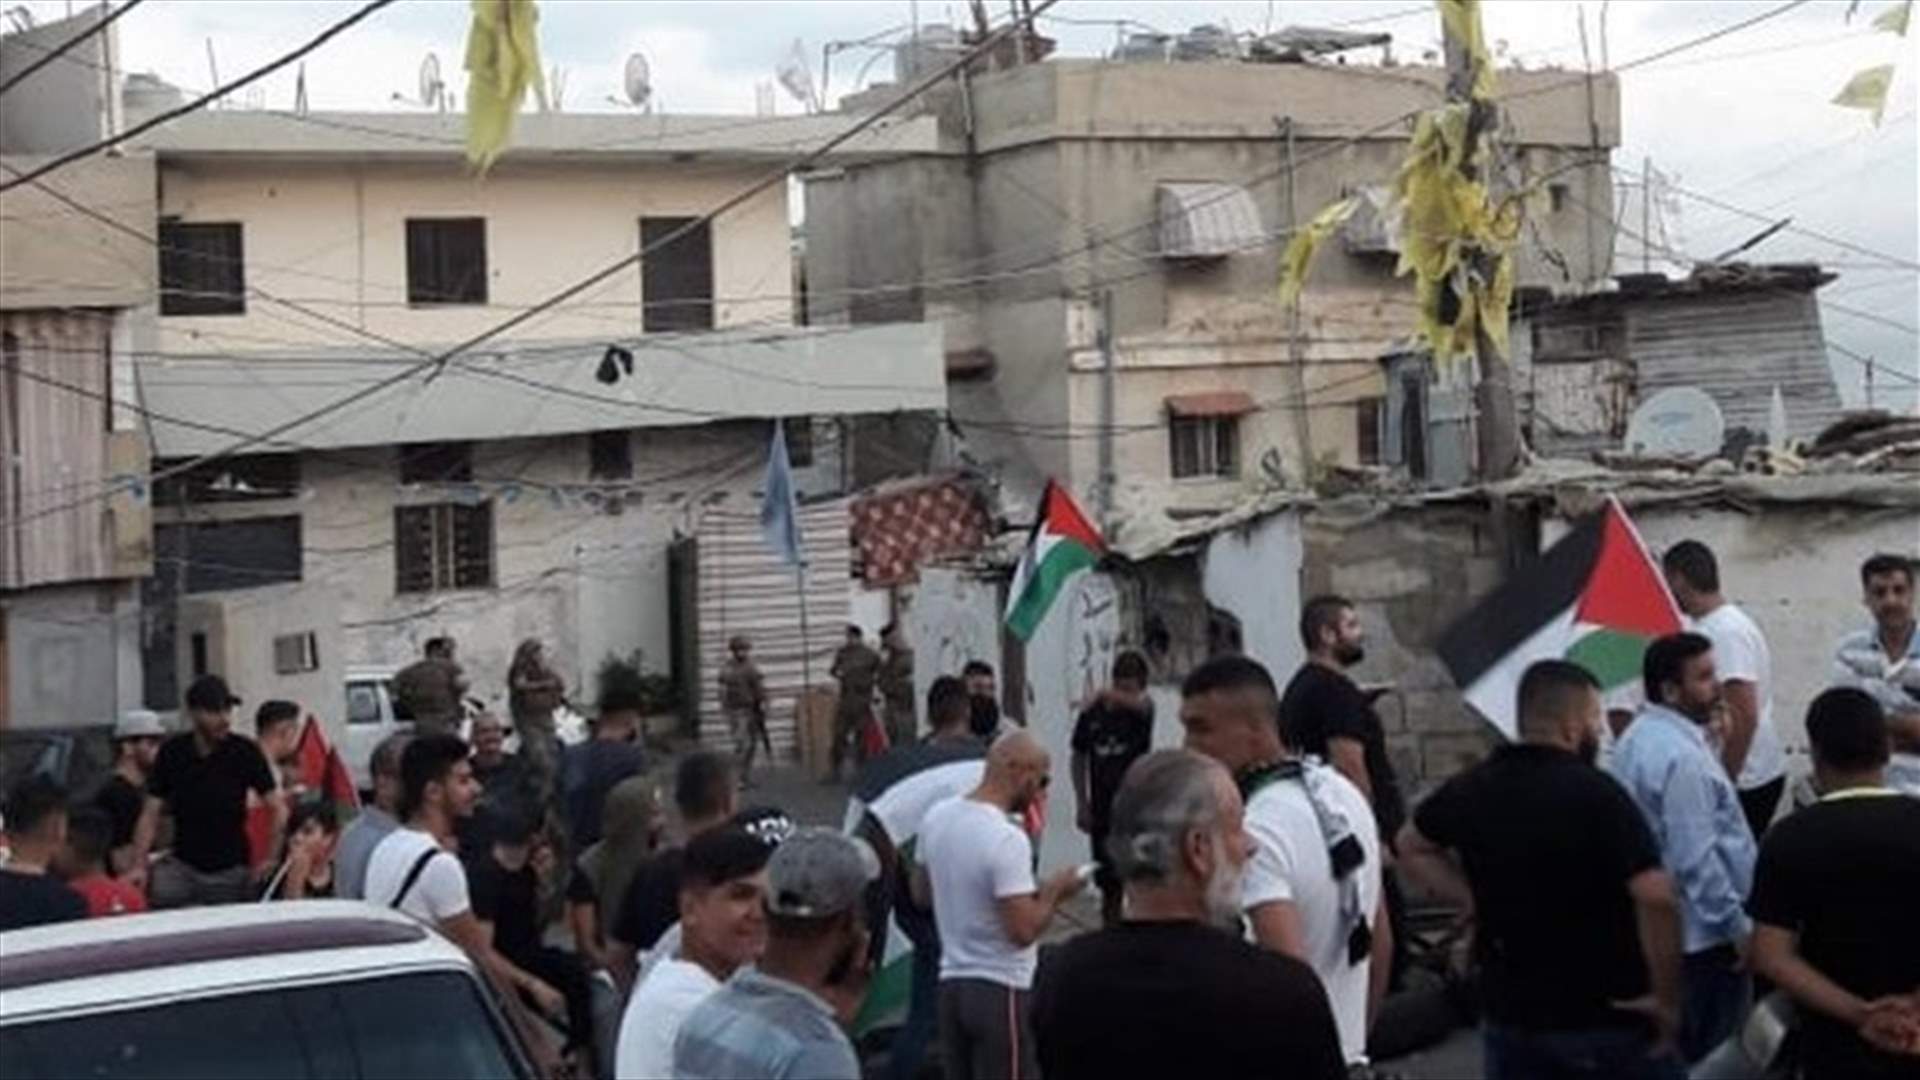 Palestinian refugees block camps’ entrances to protest against Labor Ministry decision (Photos)